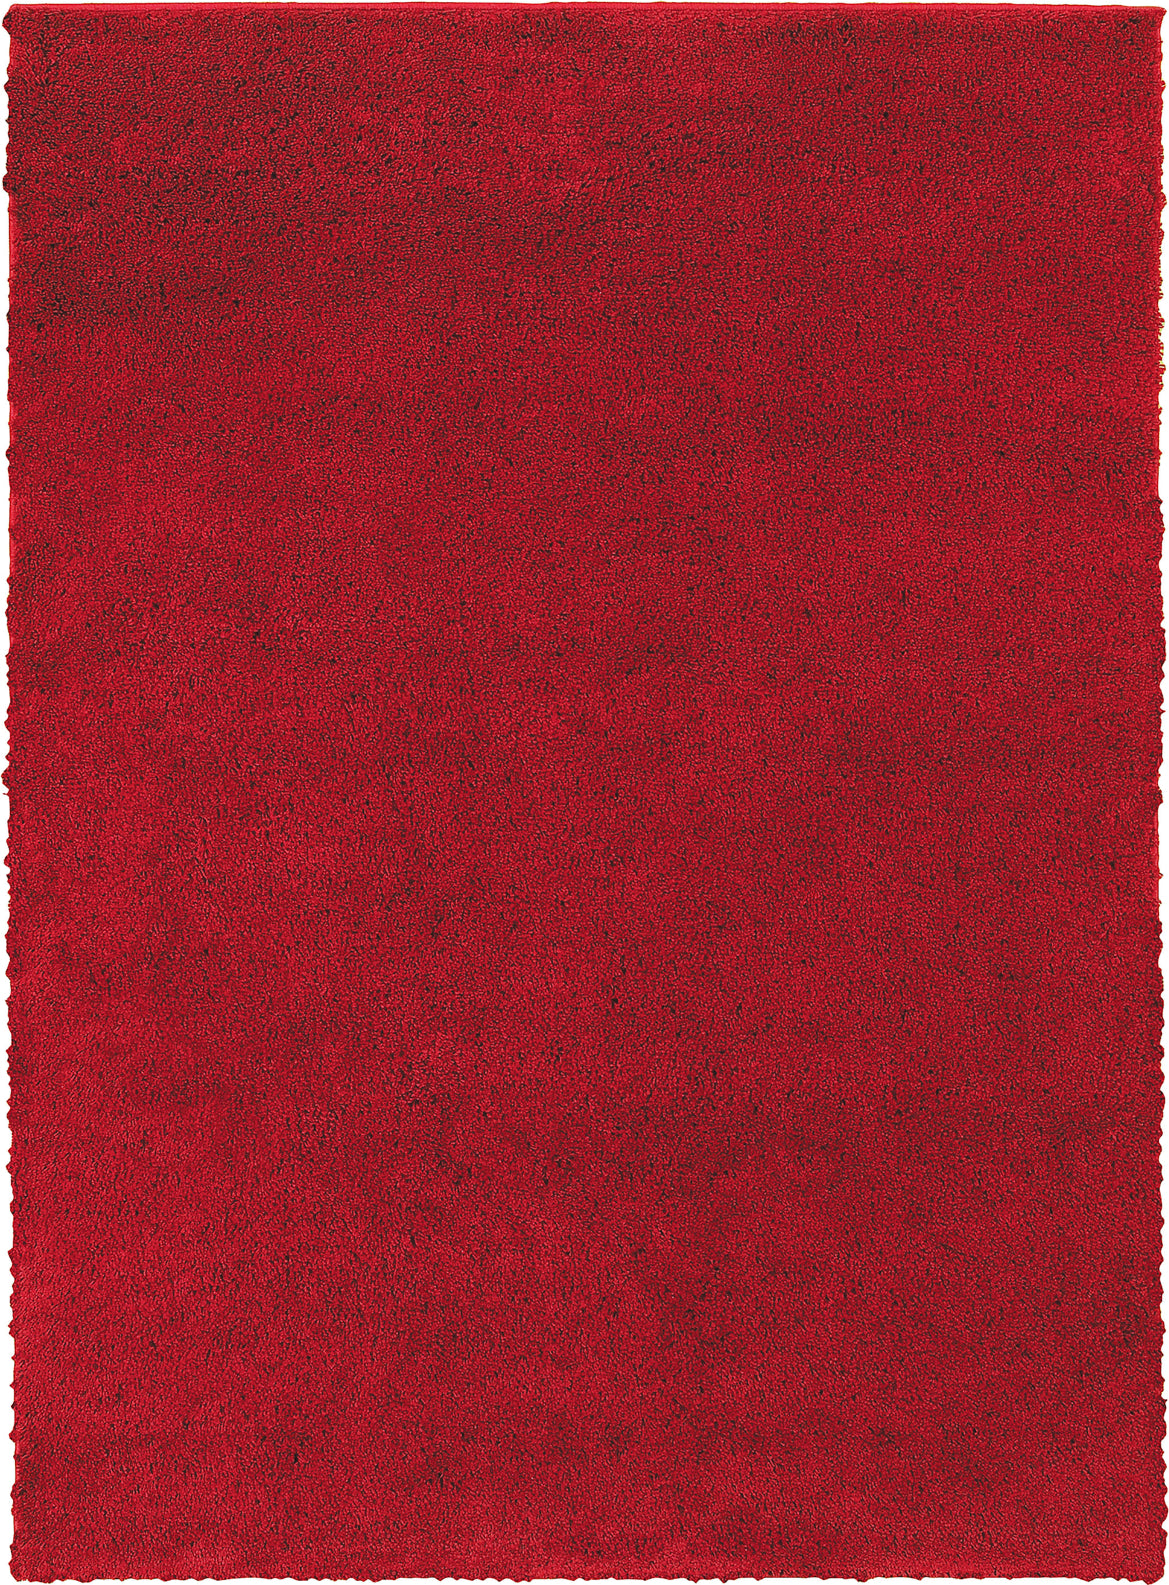 Oriental Weavers Impressions 84600 Red/Red Area Rug main image